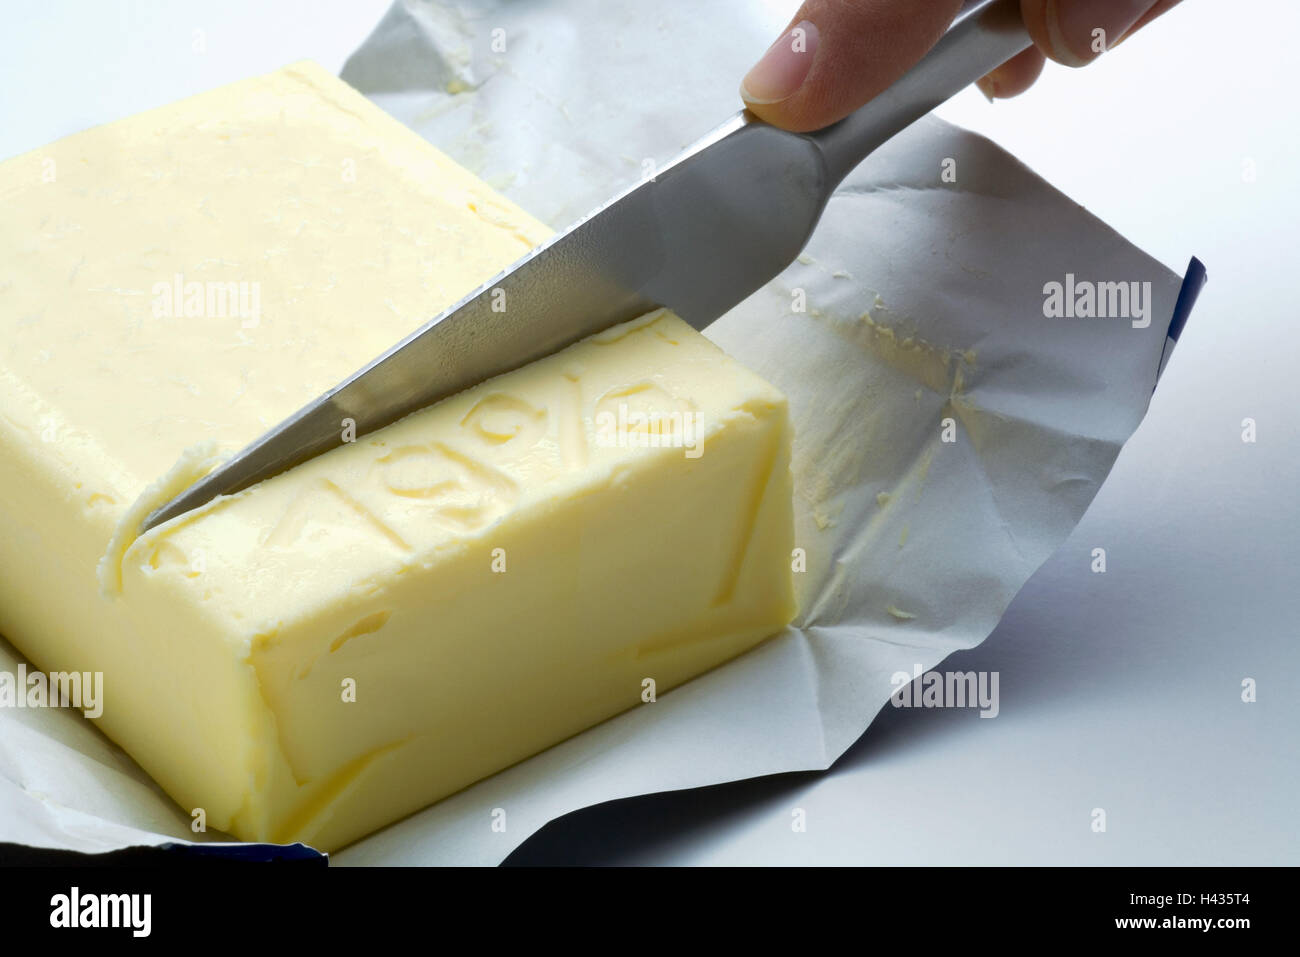 Person, knives, butter, part, 19 percent, cuts off, broached, buying power, symbol, buying power-decrease, depreciation, decrease, food, concept, effect, value added tax-increase, taxes, tax office, value added tax, surcharge, lapel, economy, finances, ta Stock Photo